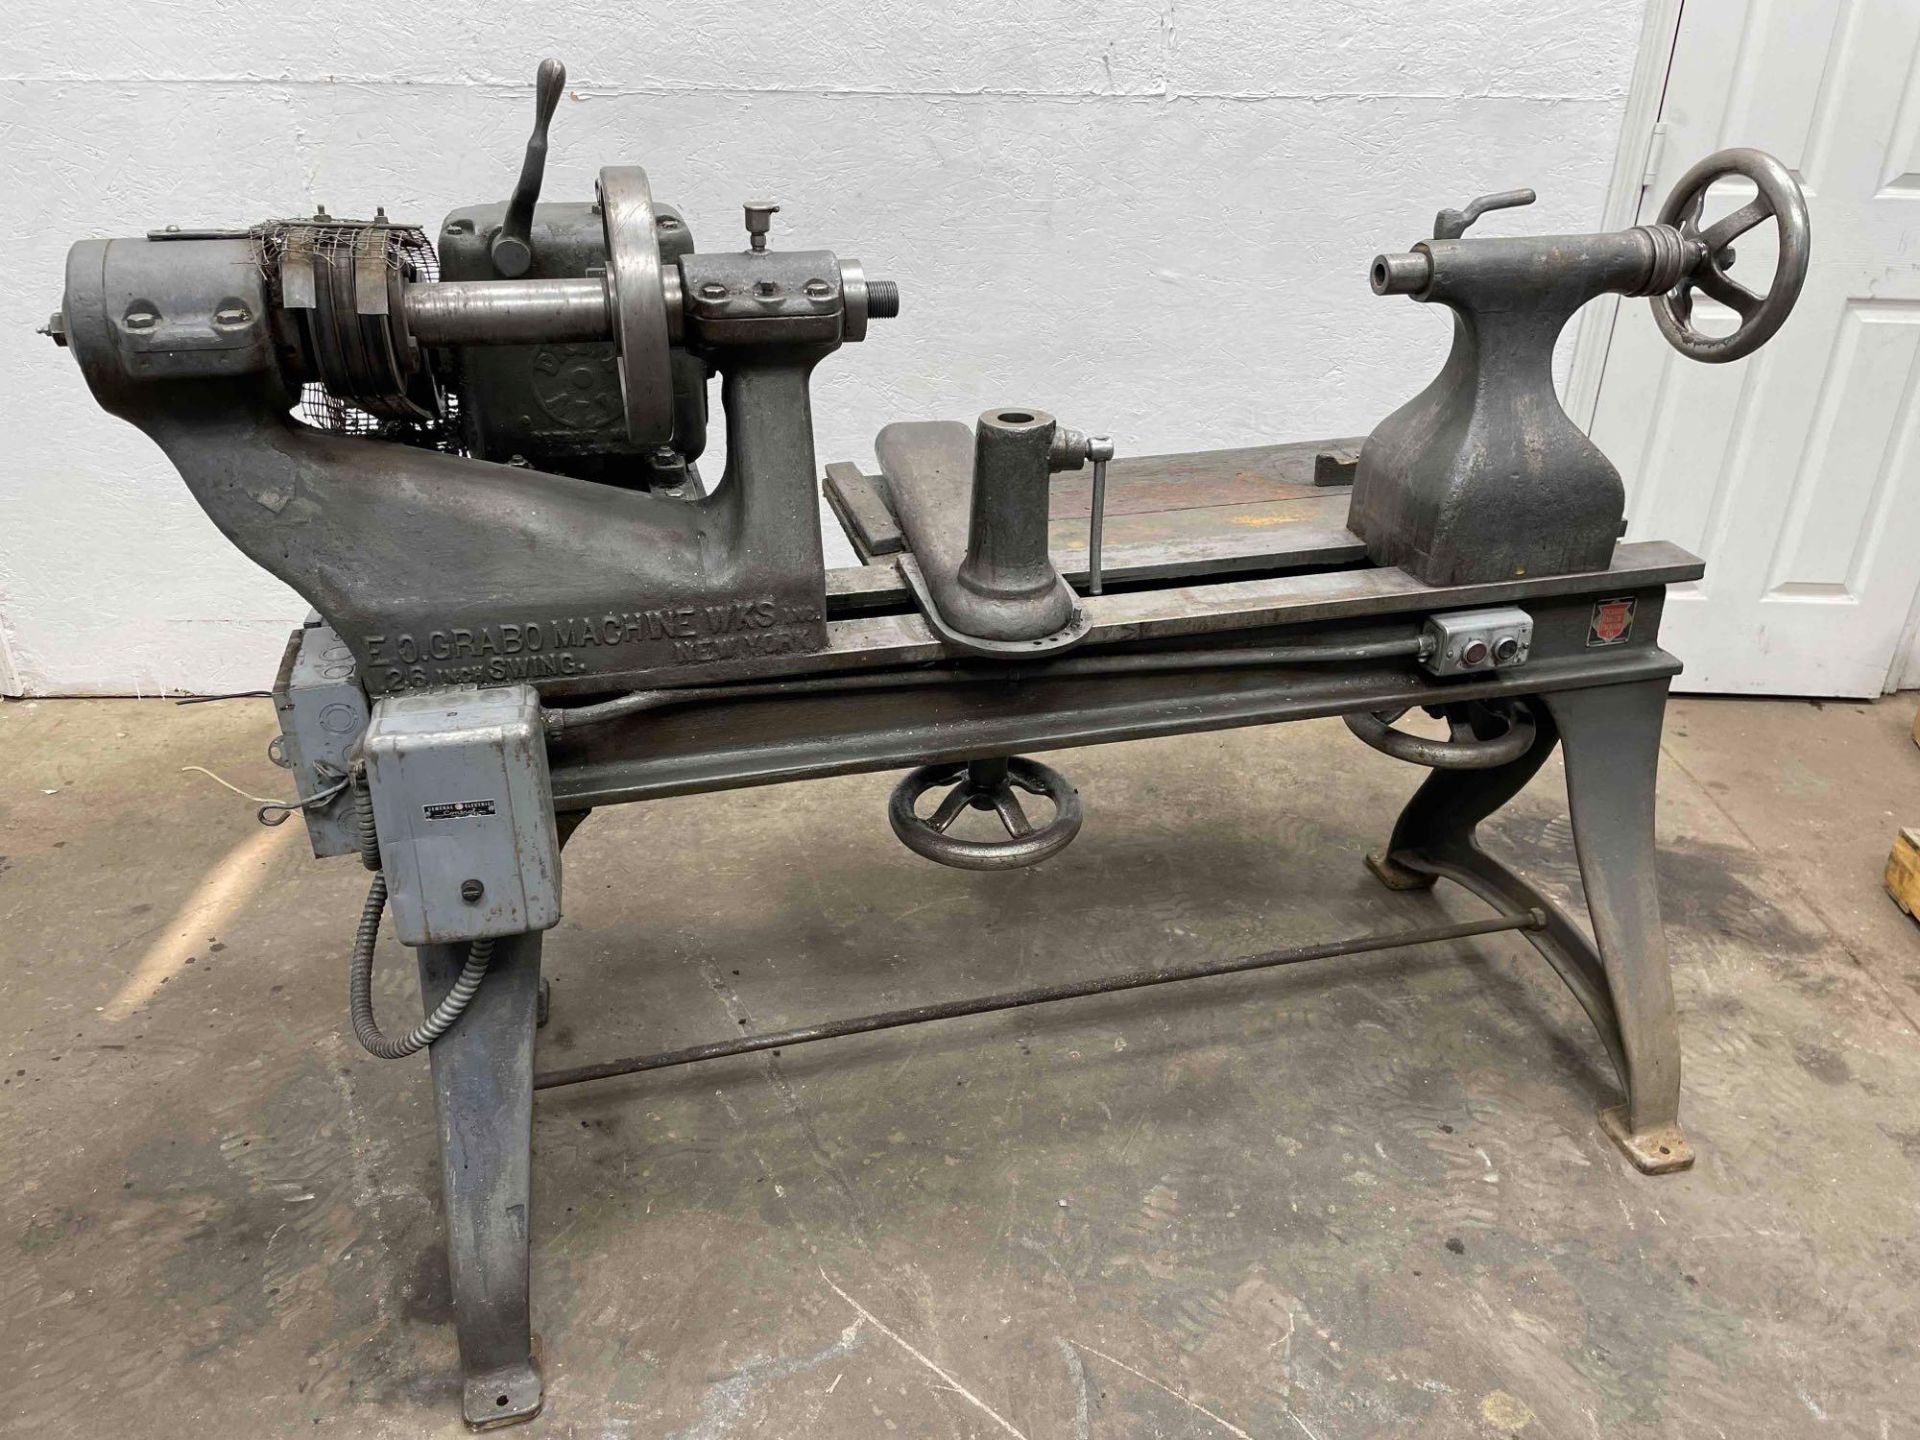 E.O.Grabo Machine Wks Spinning Lathe, 26 in Swing, 24 in Between Centers, 3 HP, 1 Phase, 208V $50 Ba - Image 3 of 18